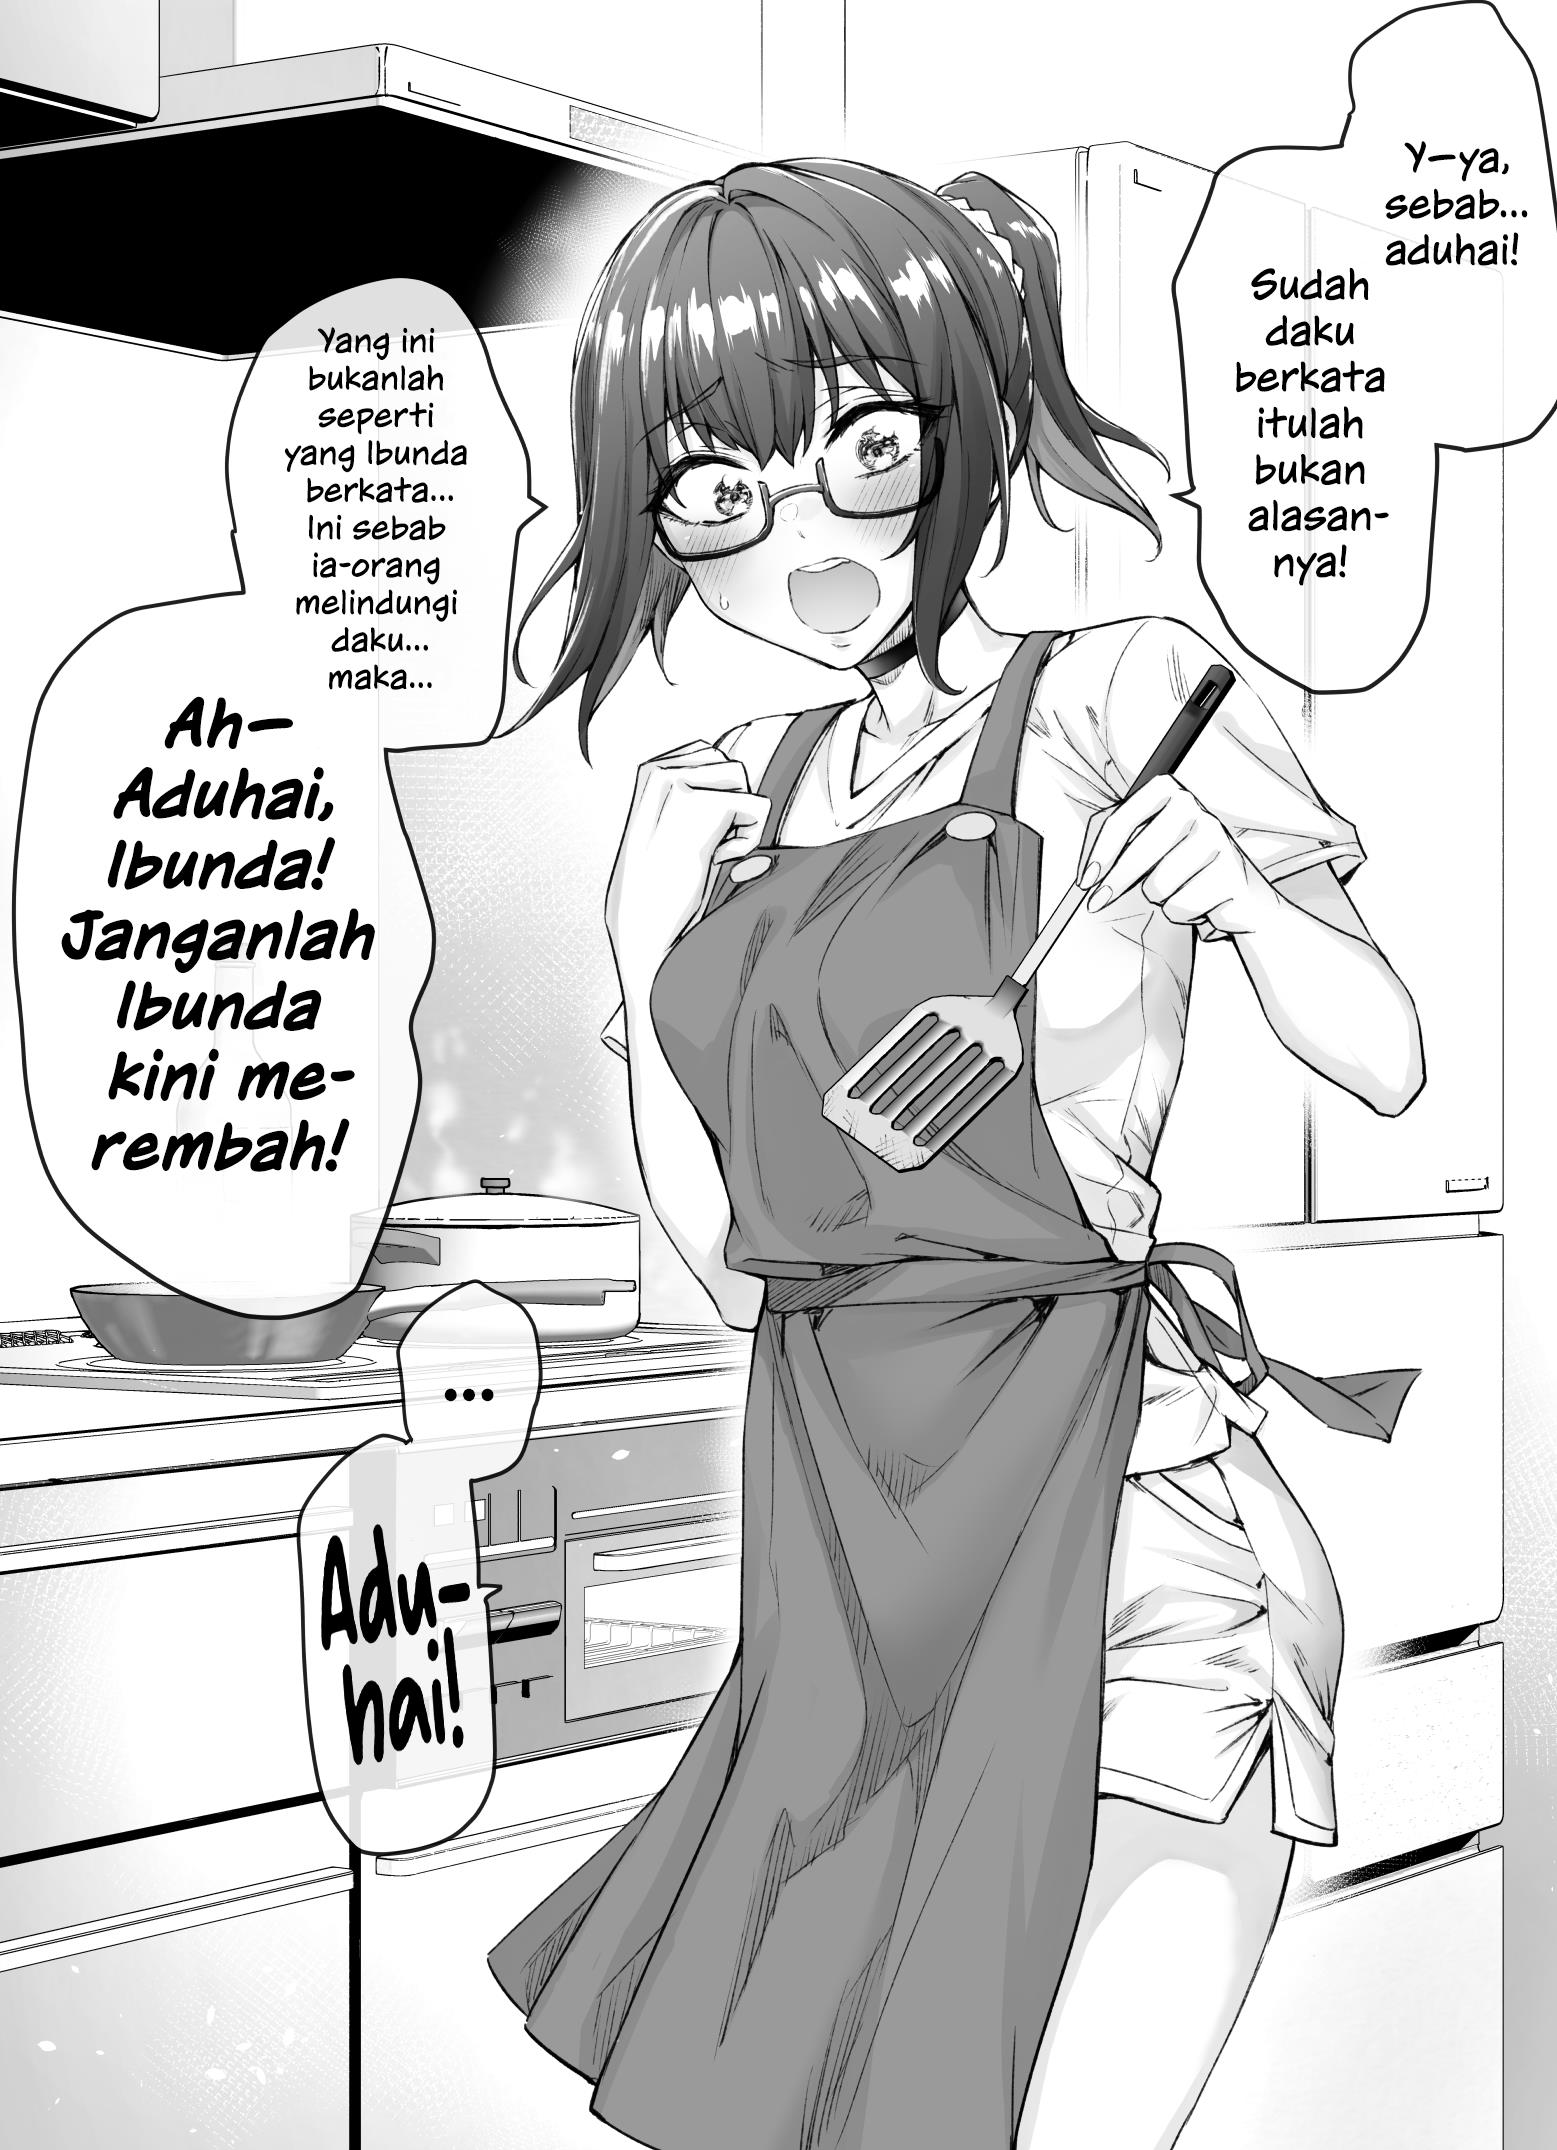 The Tsuntsuntsuntsuntsuntsun tsuntsuntsuntsuntsundere Girl Getting Less and Less Tsun Day by Day Chapter 16.1